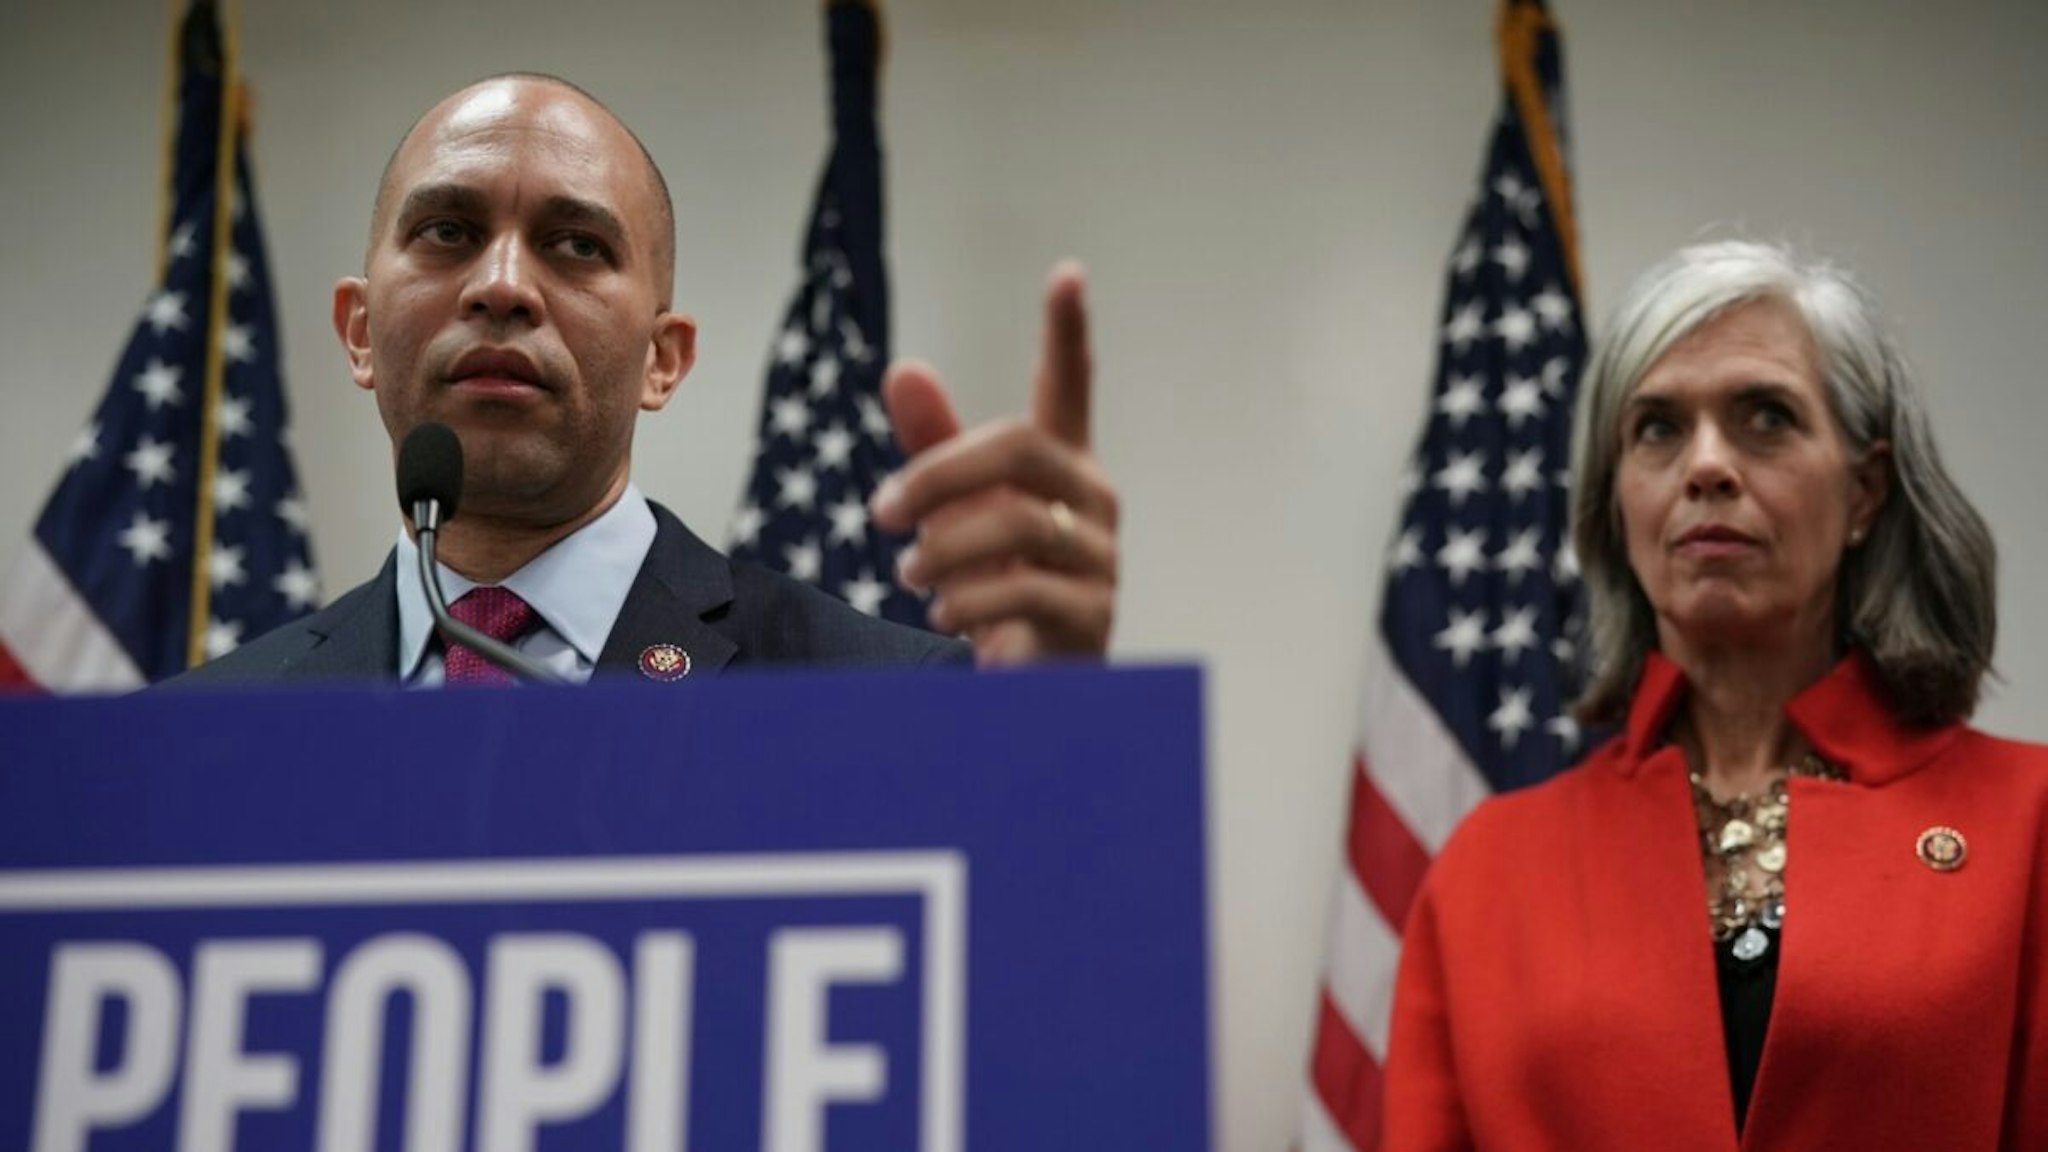 WASHINGTON, DC - JANUARY 09: U.S. House Democratic Caucus Chairman Rep. Hakeem Jeffries (D-NY) speaks as House Democratic Caucus Vice Chair Katherine Clark (D-MA) listens during a news conference after a caucus meeting at the U.S. Capitol January 9, 2019 in Washington, DC. House Democrats gathered to discuss the Democratic agenda as the partial government shutdown enters day 19.